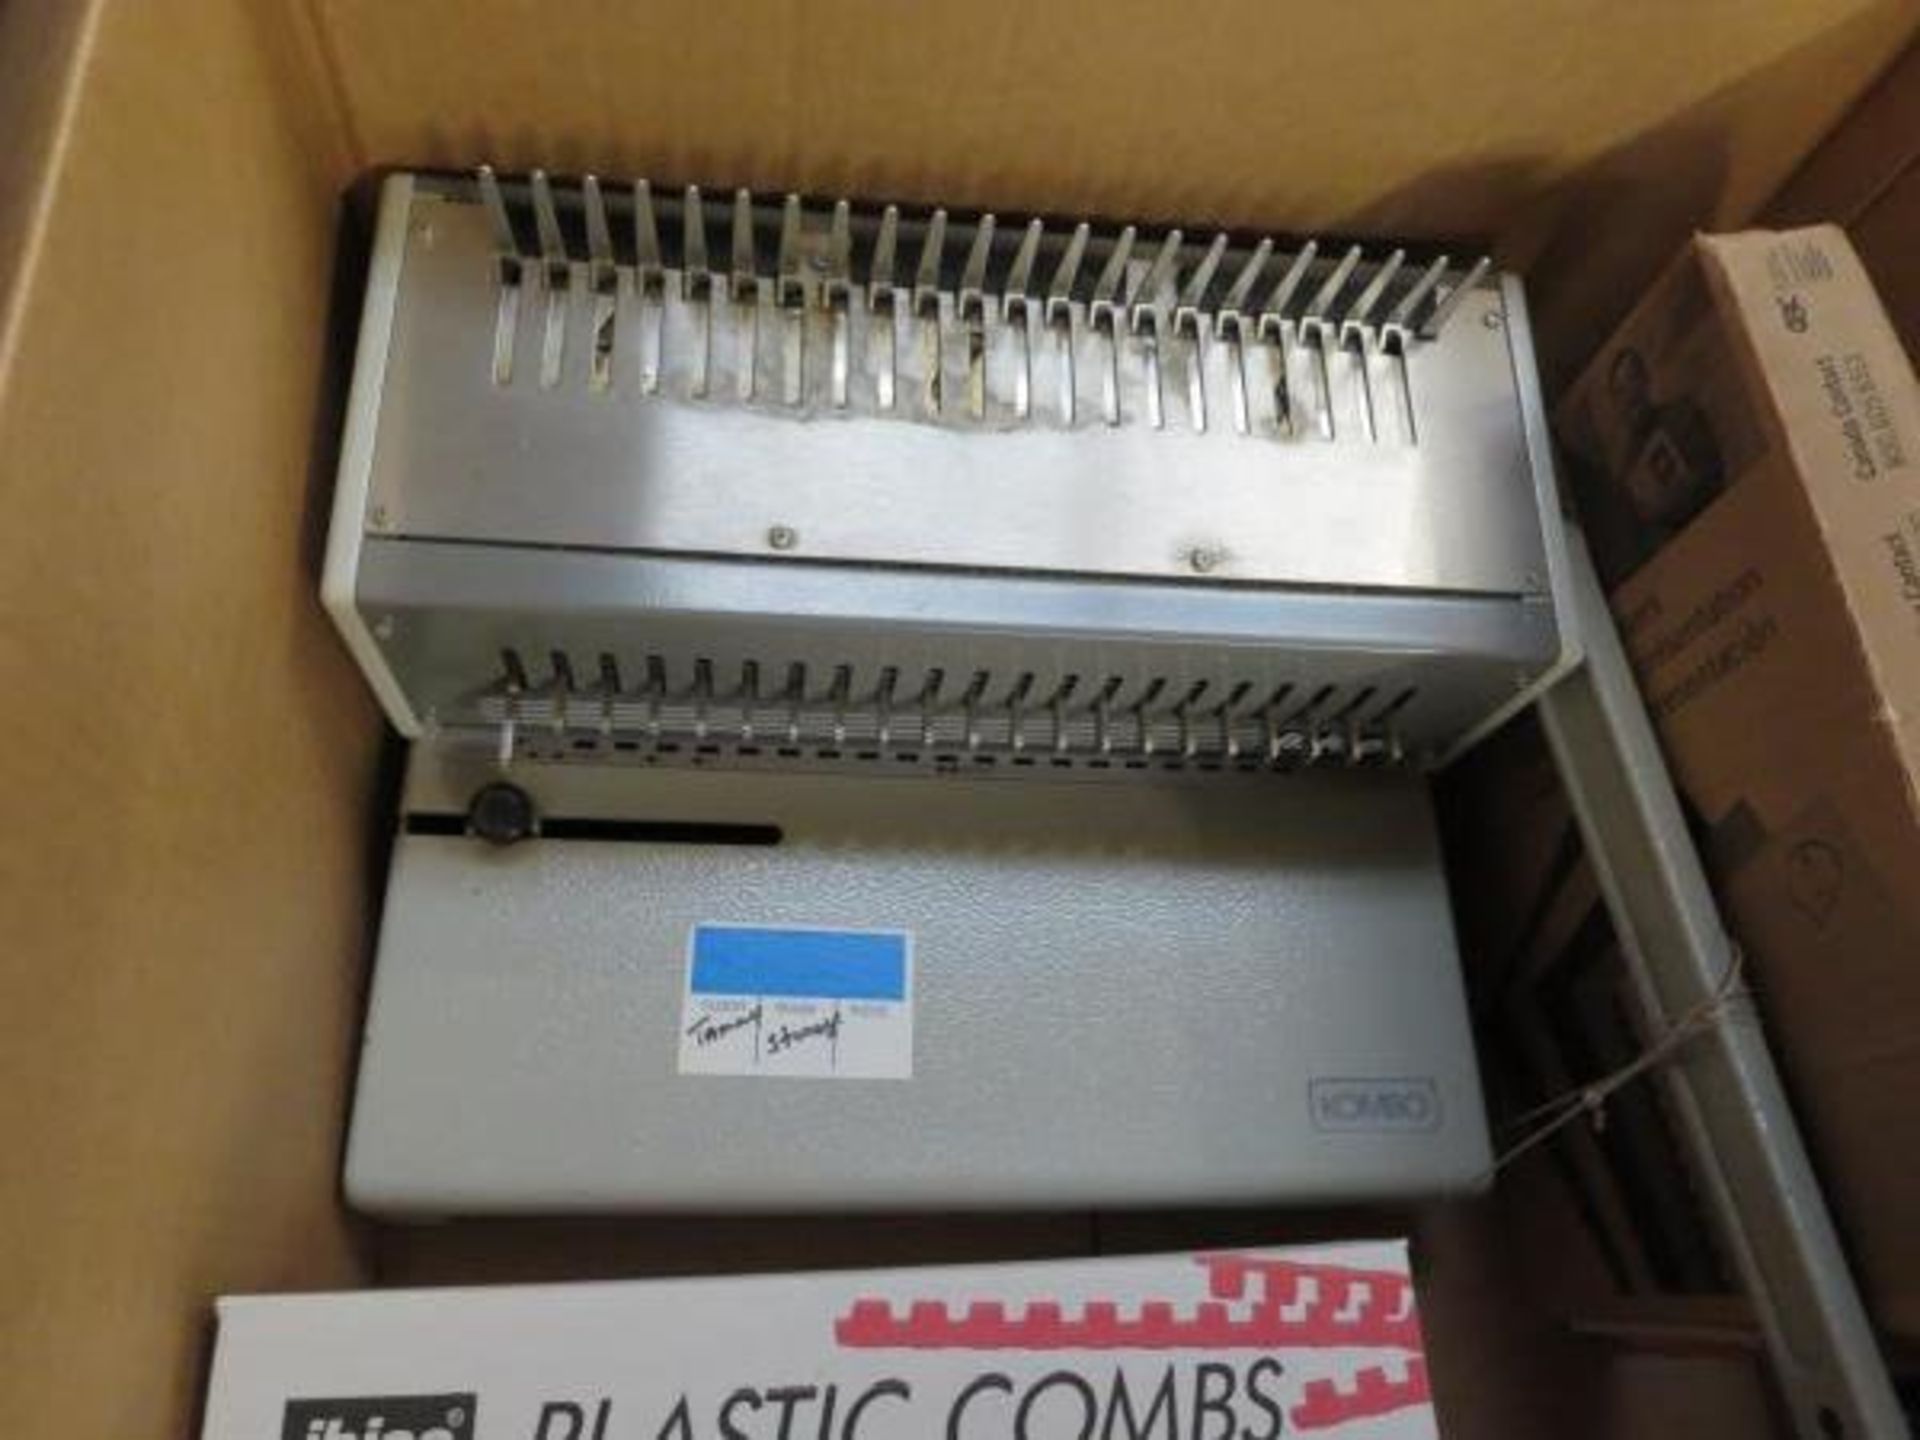 IBICO Kombo Binder Punch with Plastic Combs & Covers. Hit # 2203735. Center Rack.